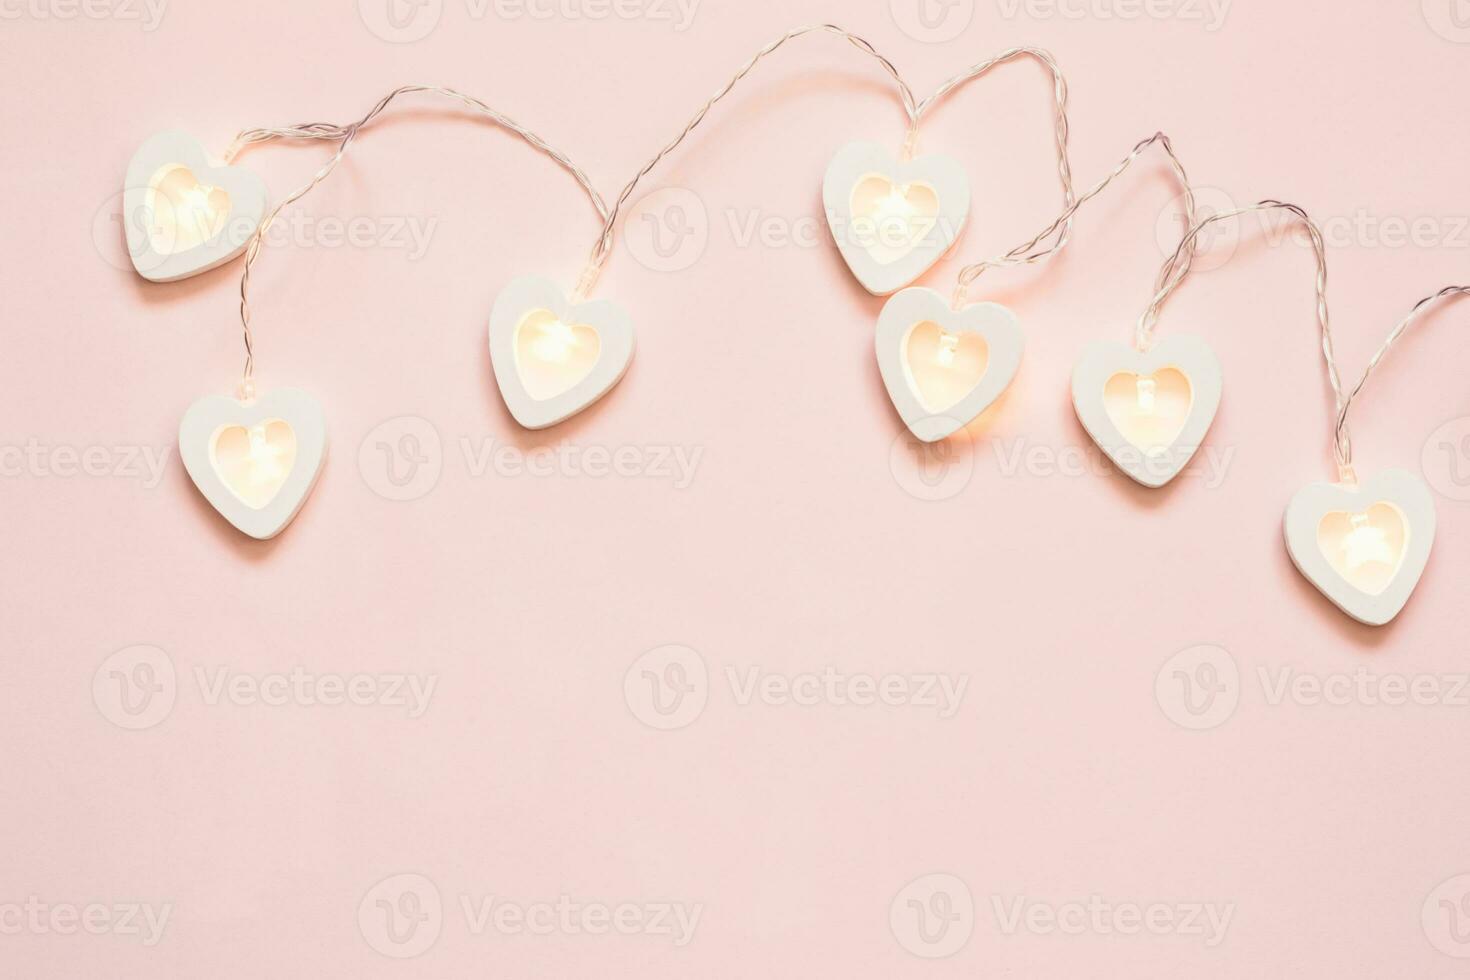 Heart shape garland on a pink pastel background. Valentine's Day or wedding party decoration photo